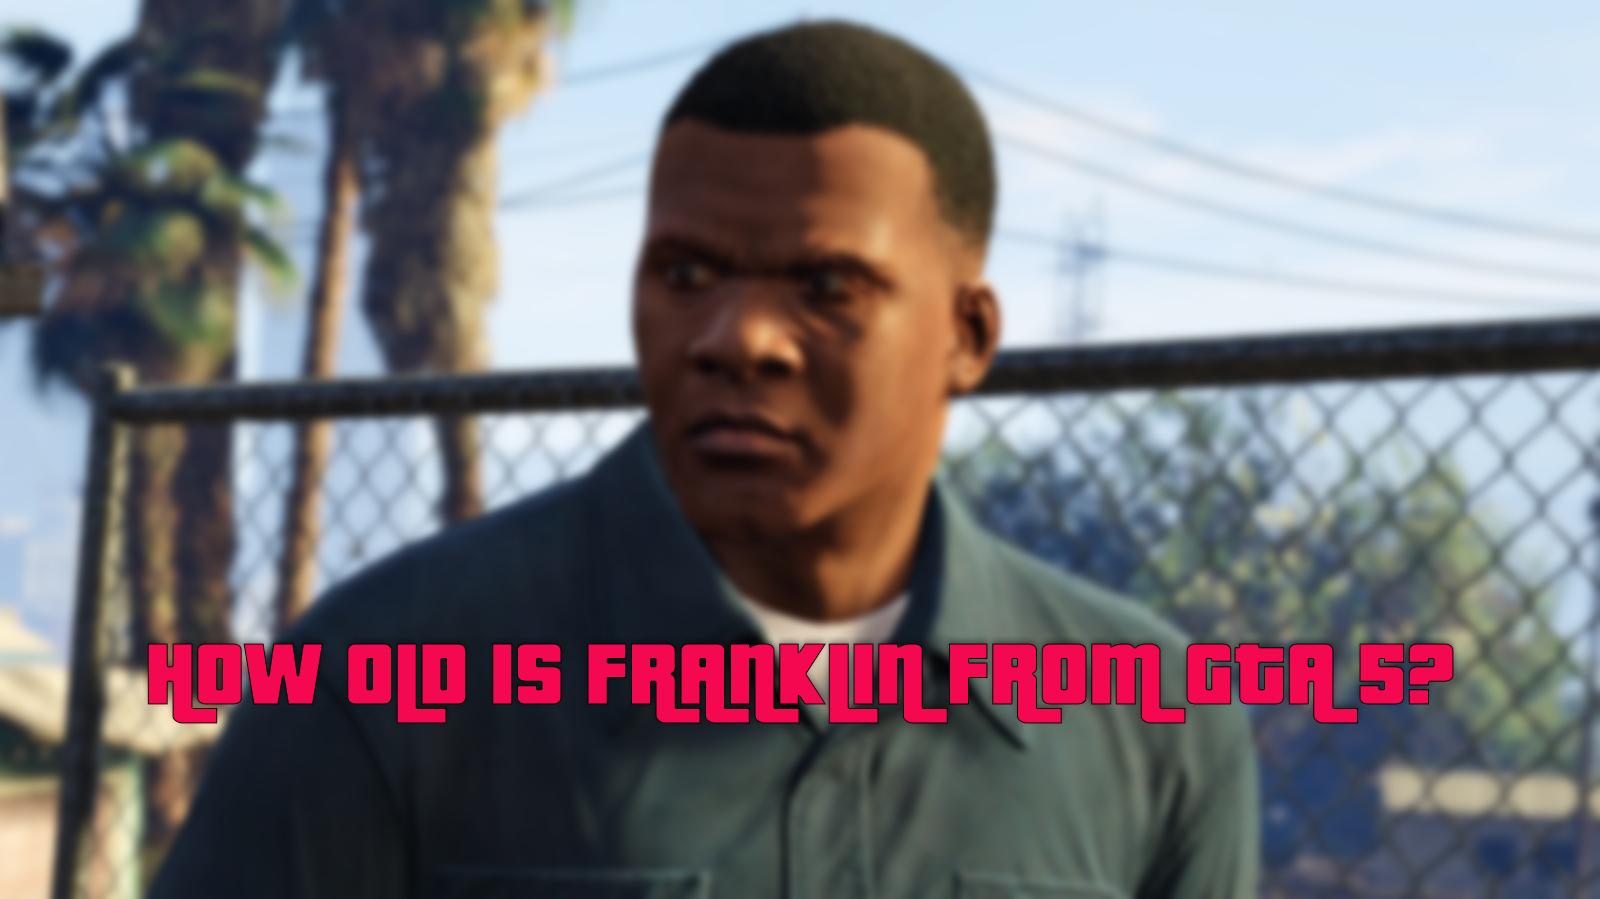 How old is Franklin from GTA 5